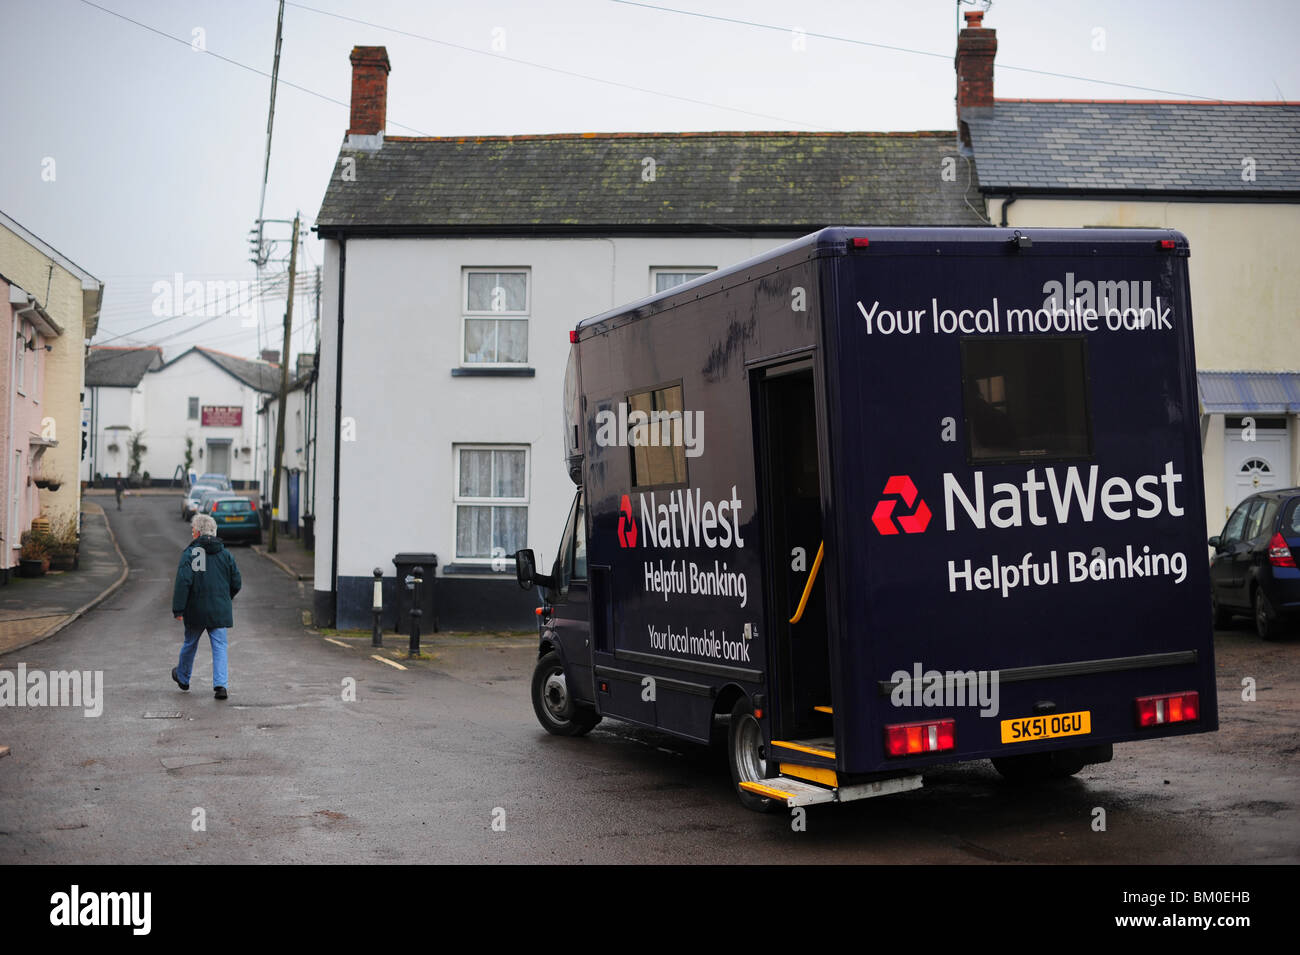 a natwest mobile bank, pictured during a weekly visit to Chulmleigh, a village in Devon, UK Stock Photo